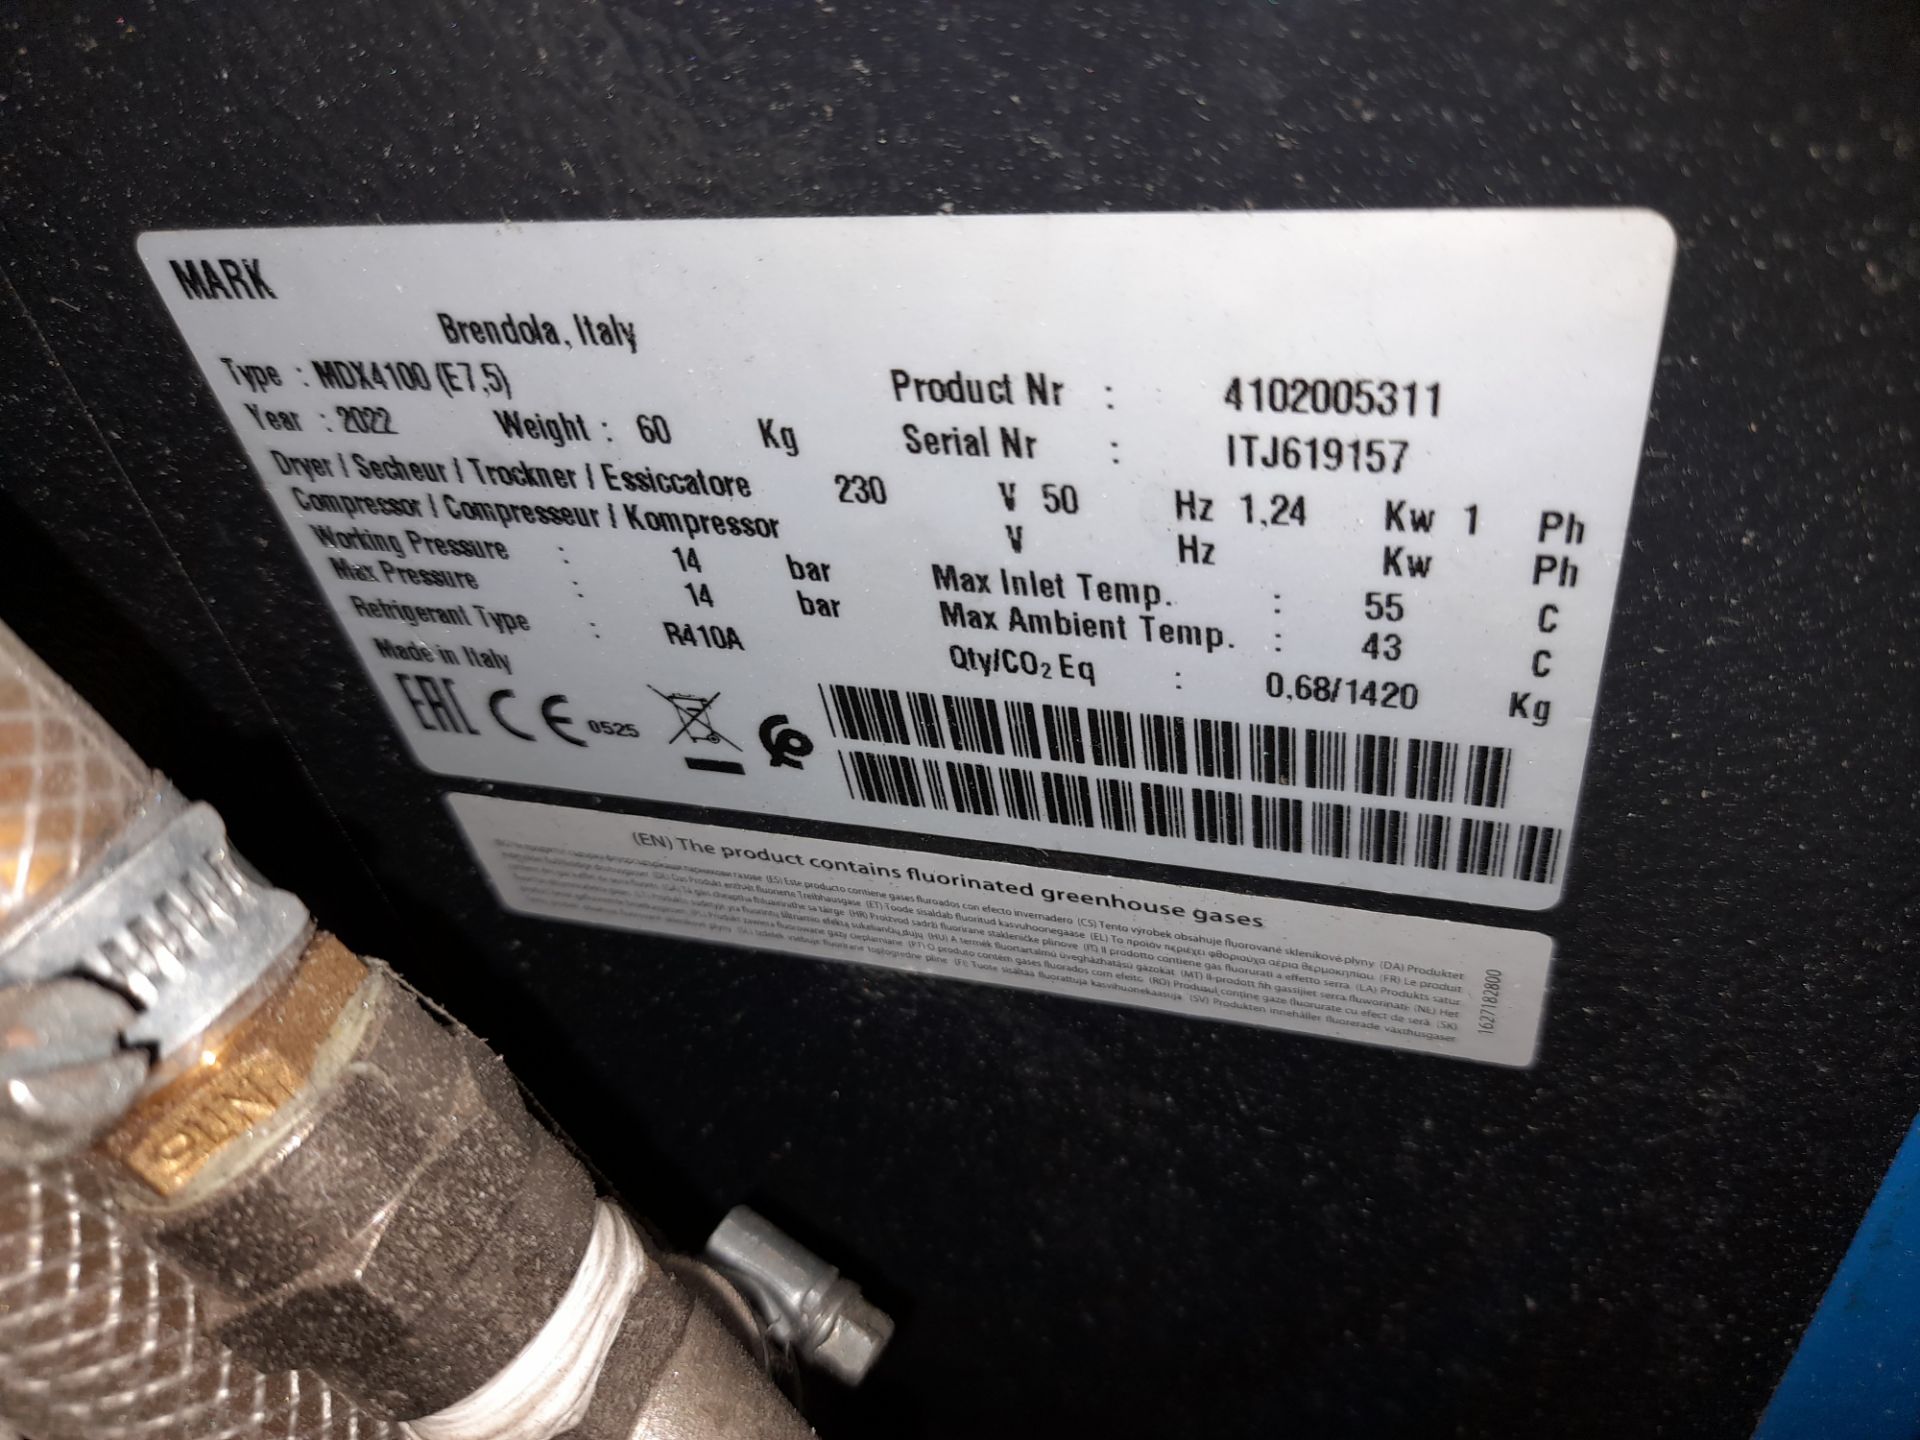 Mark MDX4100 dryer, Serial No. ITJ619157, Year 2022, - Image 2 of 2